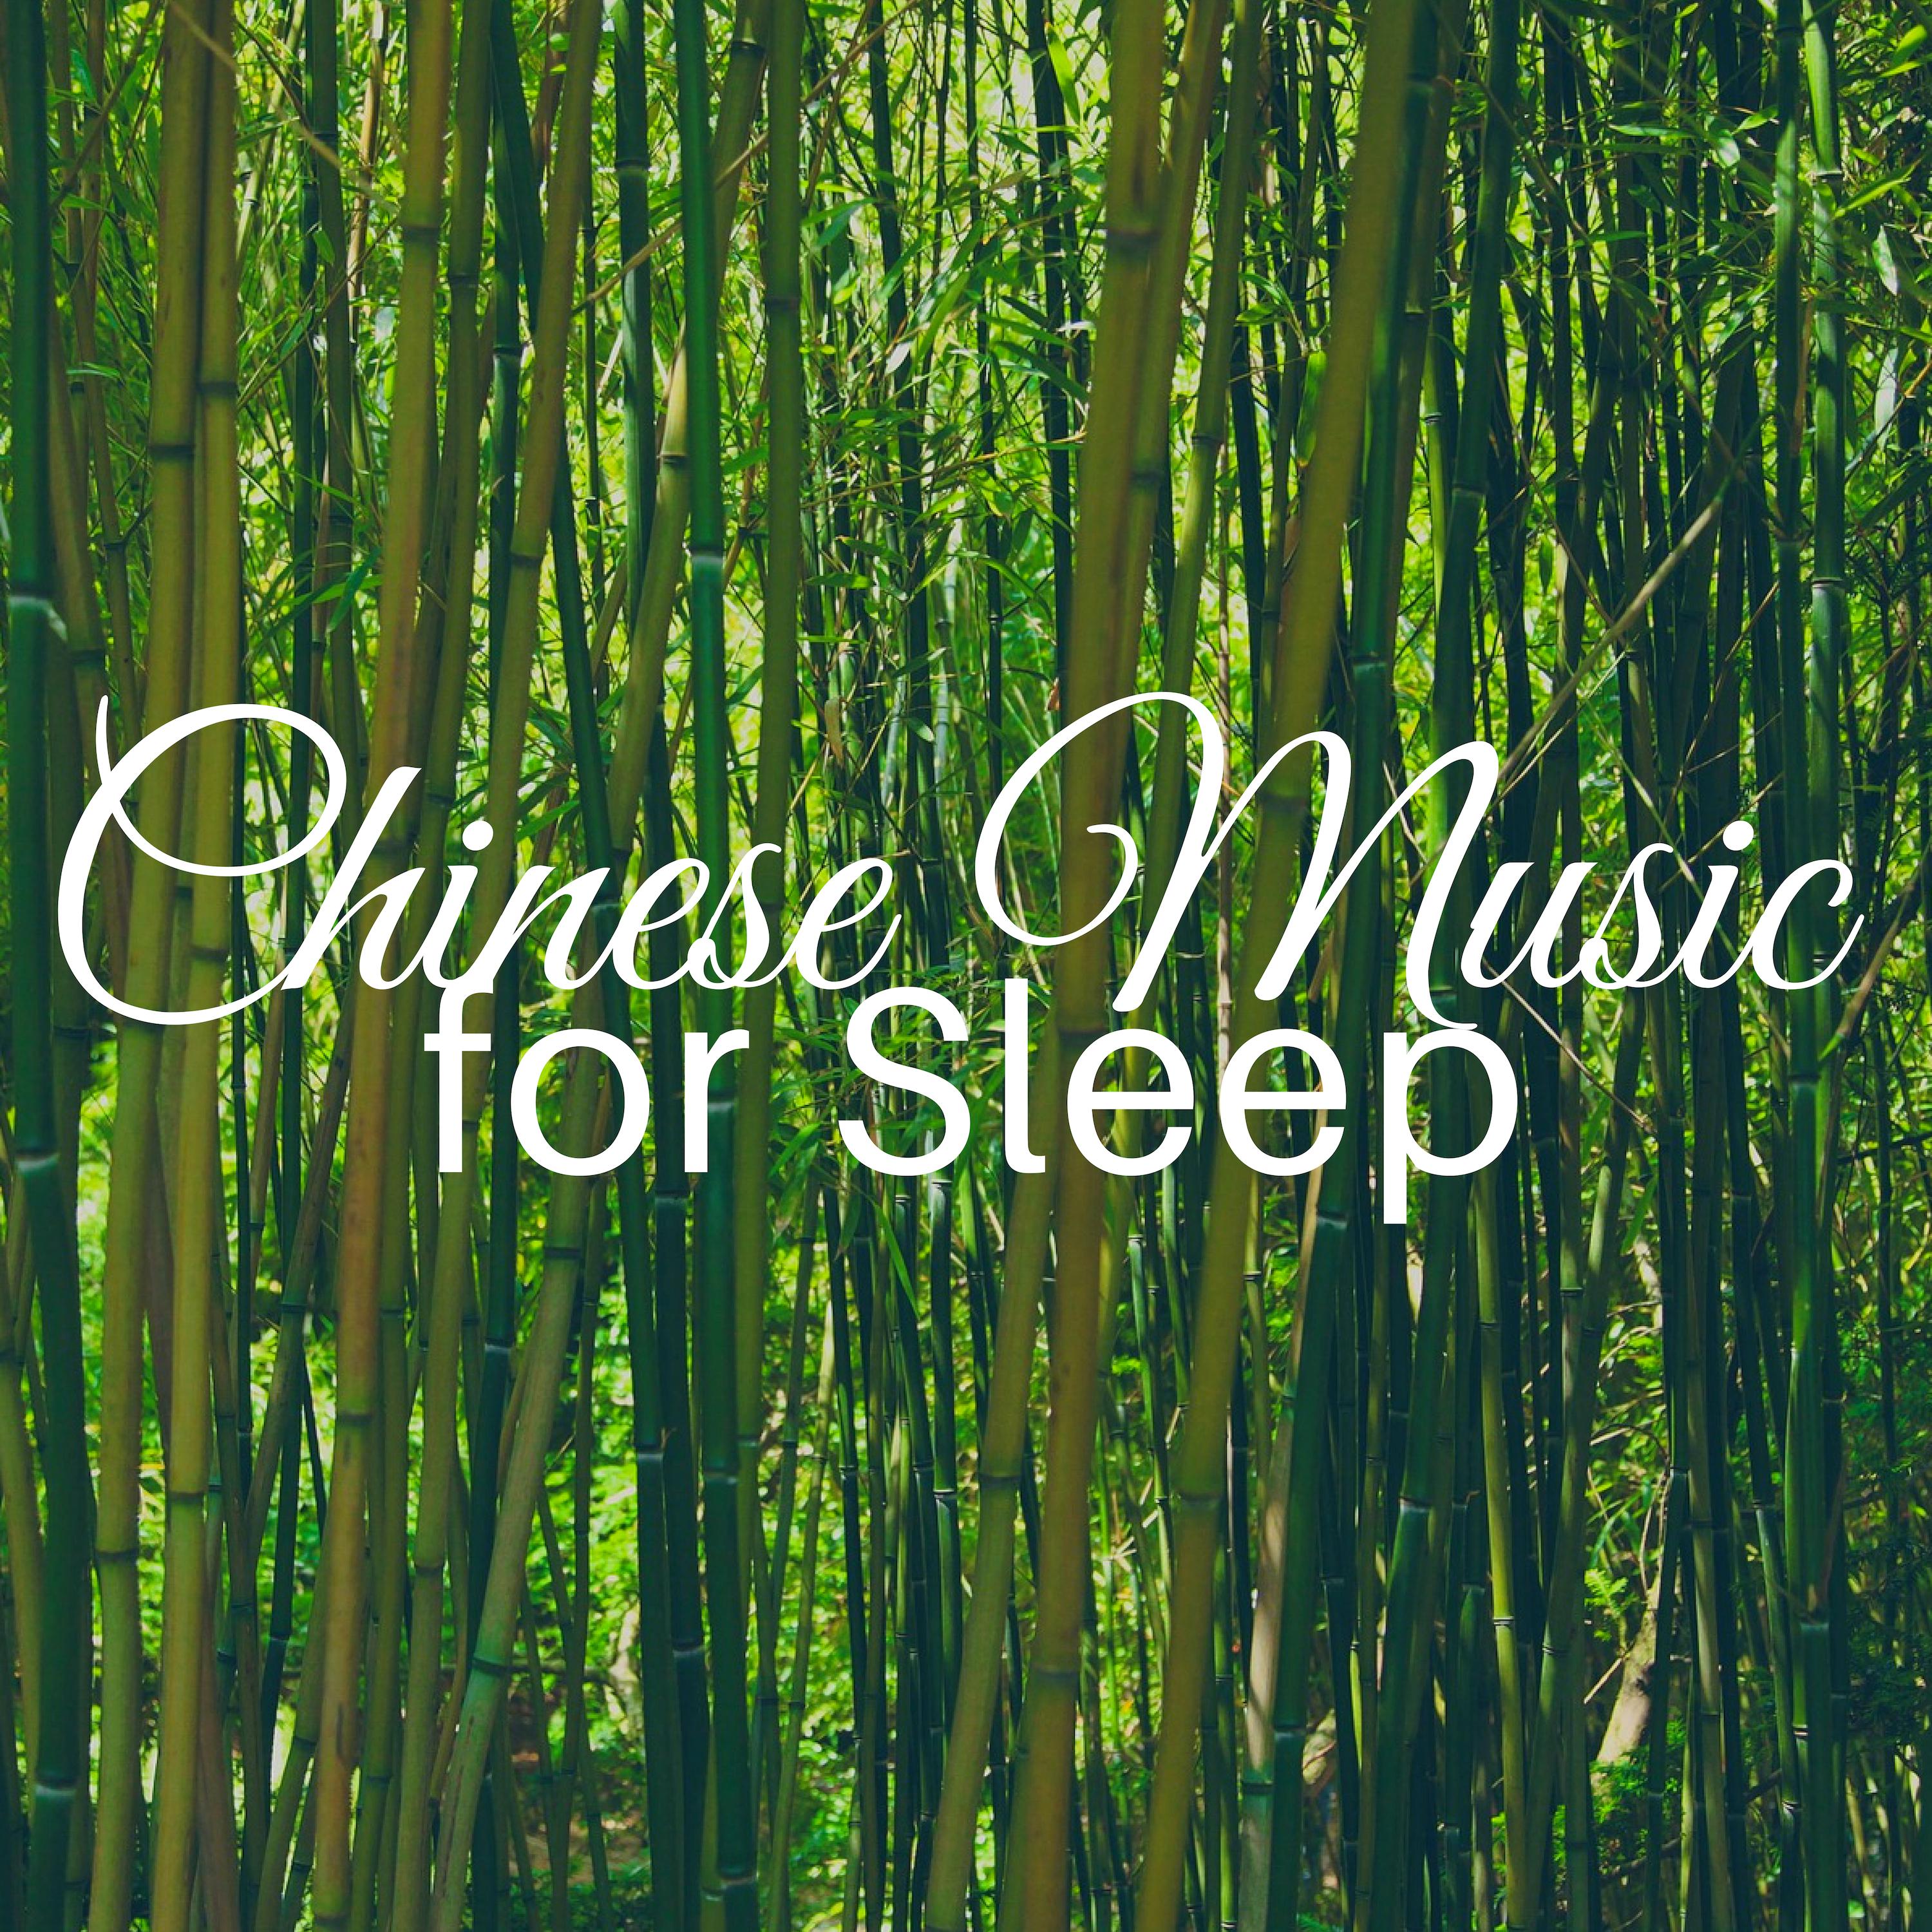 Chinese Music for Sleep - Bamboo Flute and Guzheng